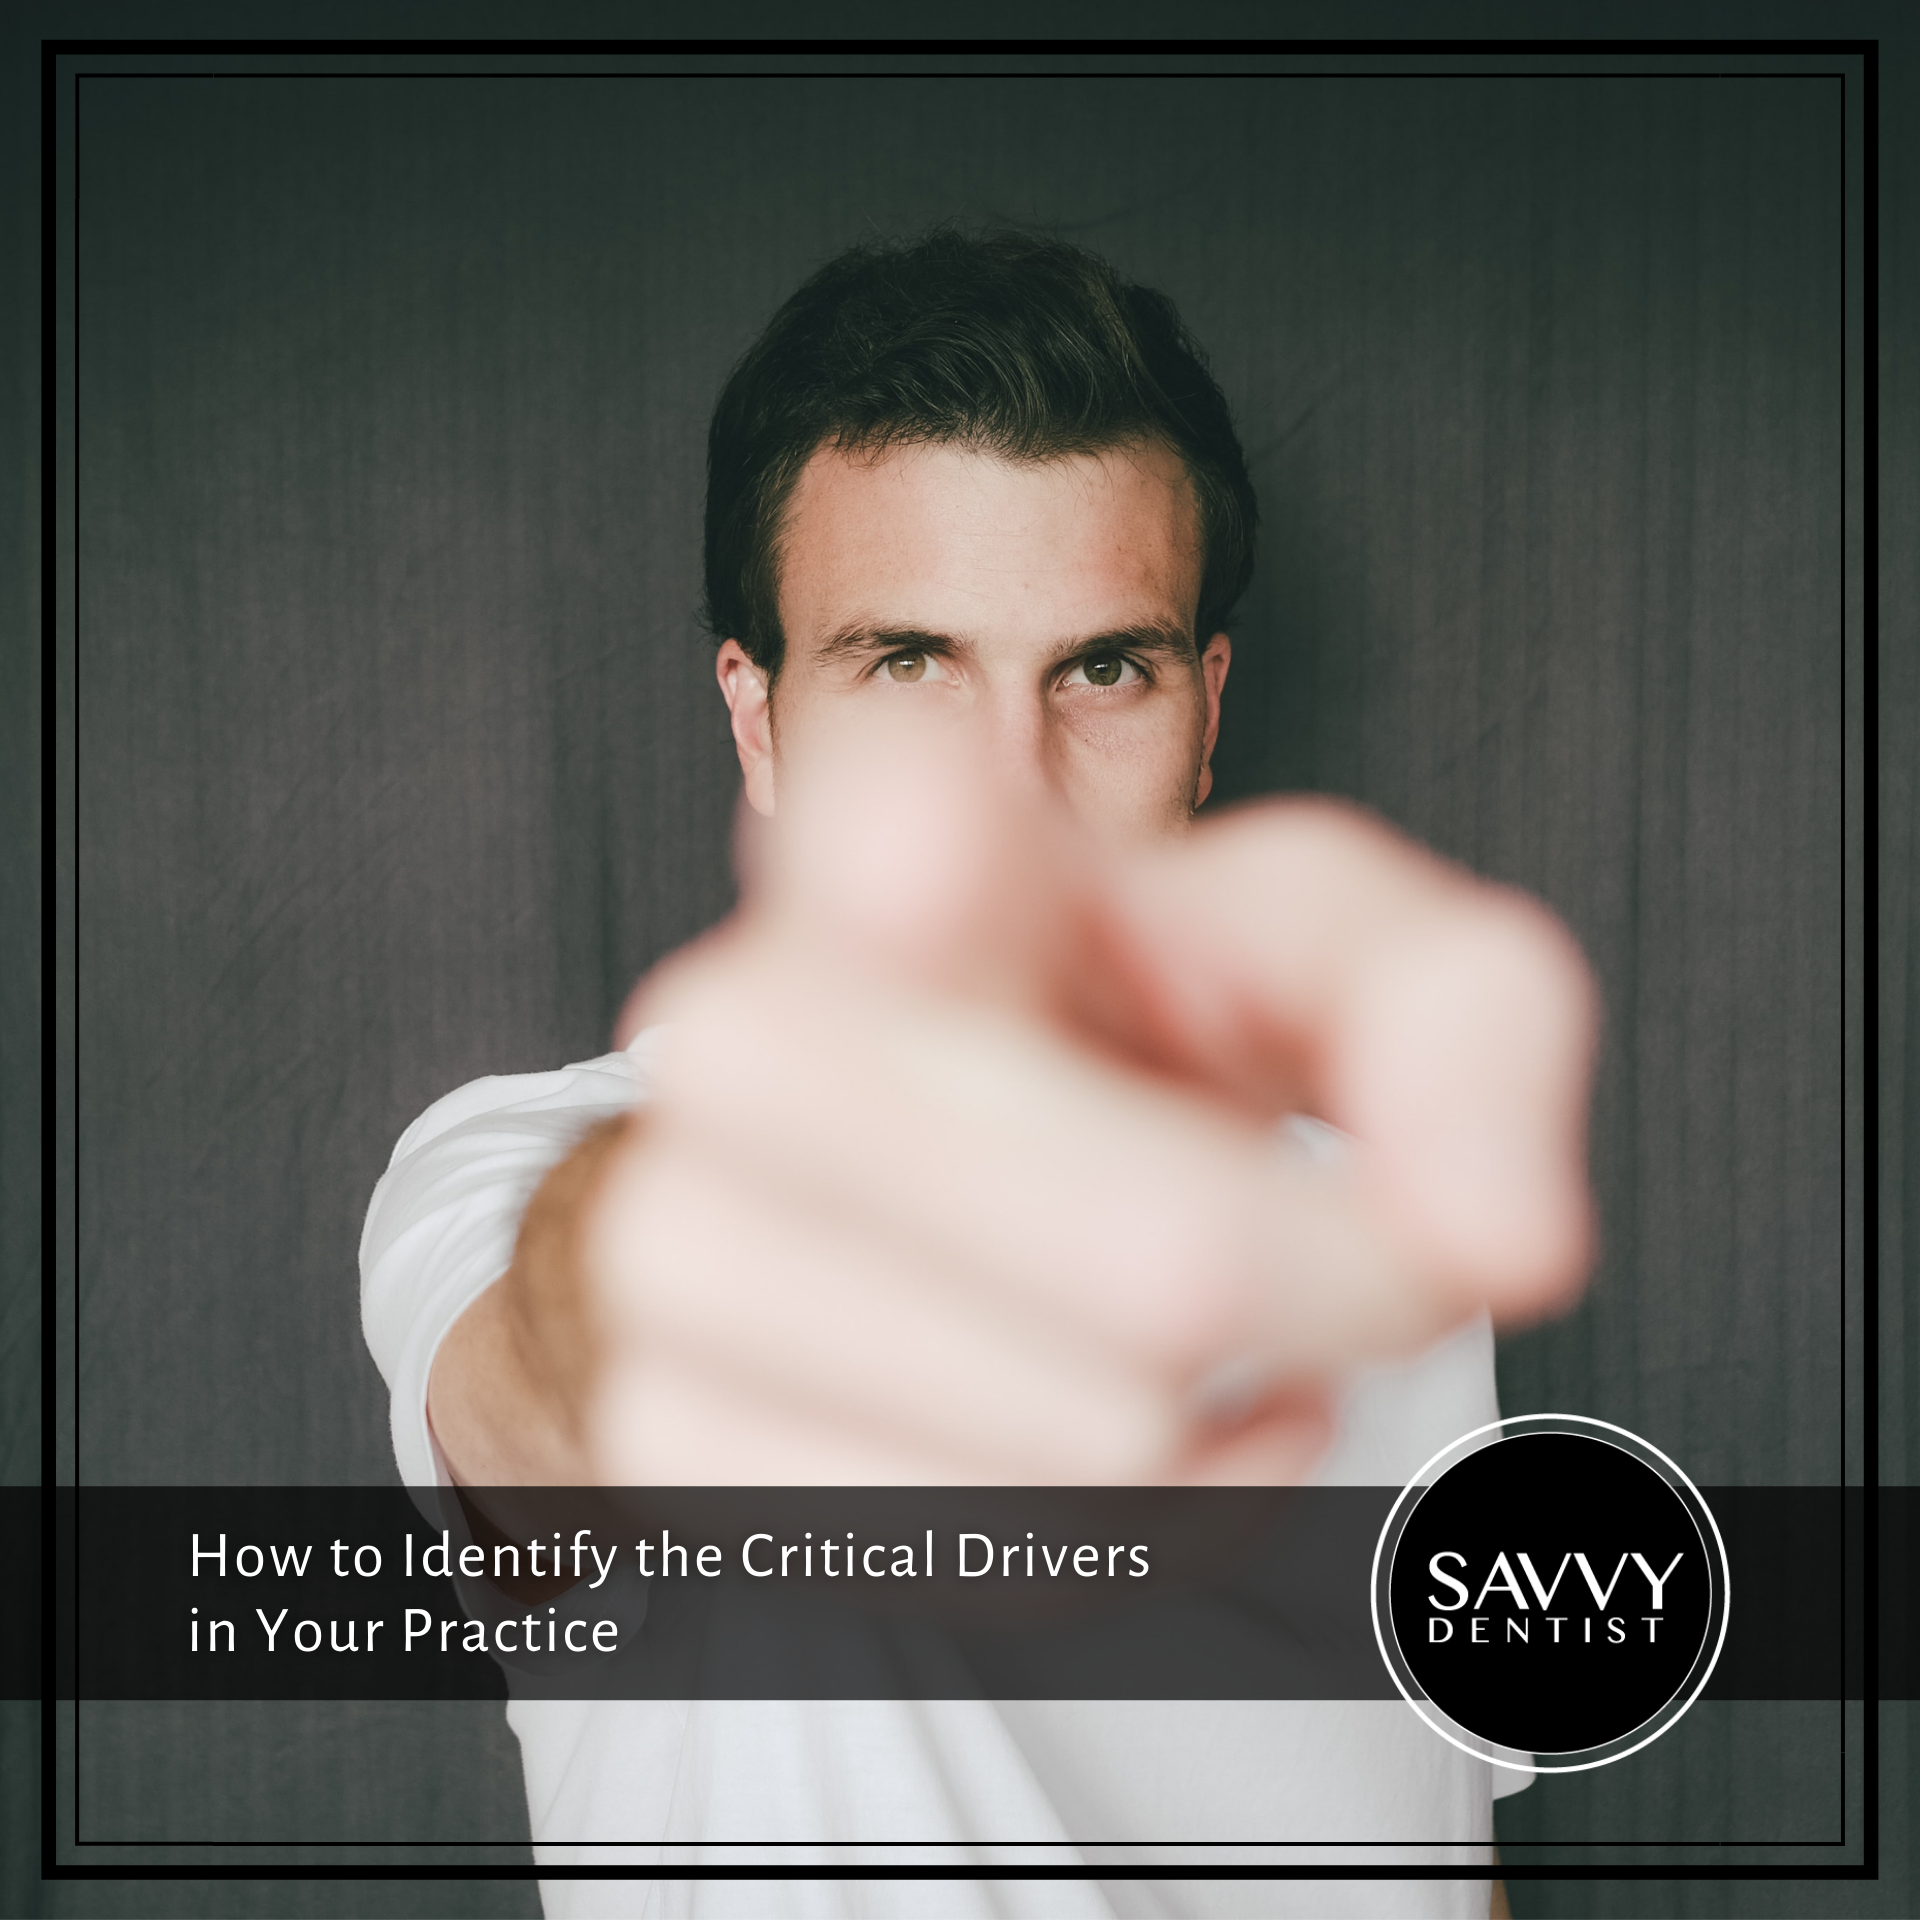 How to Identify the Critical Drivers in Your Practice